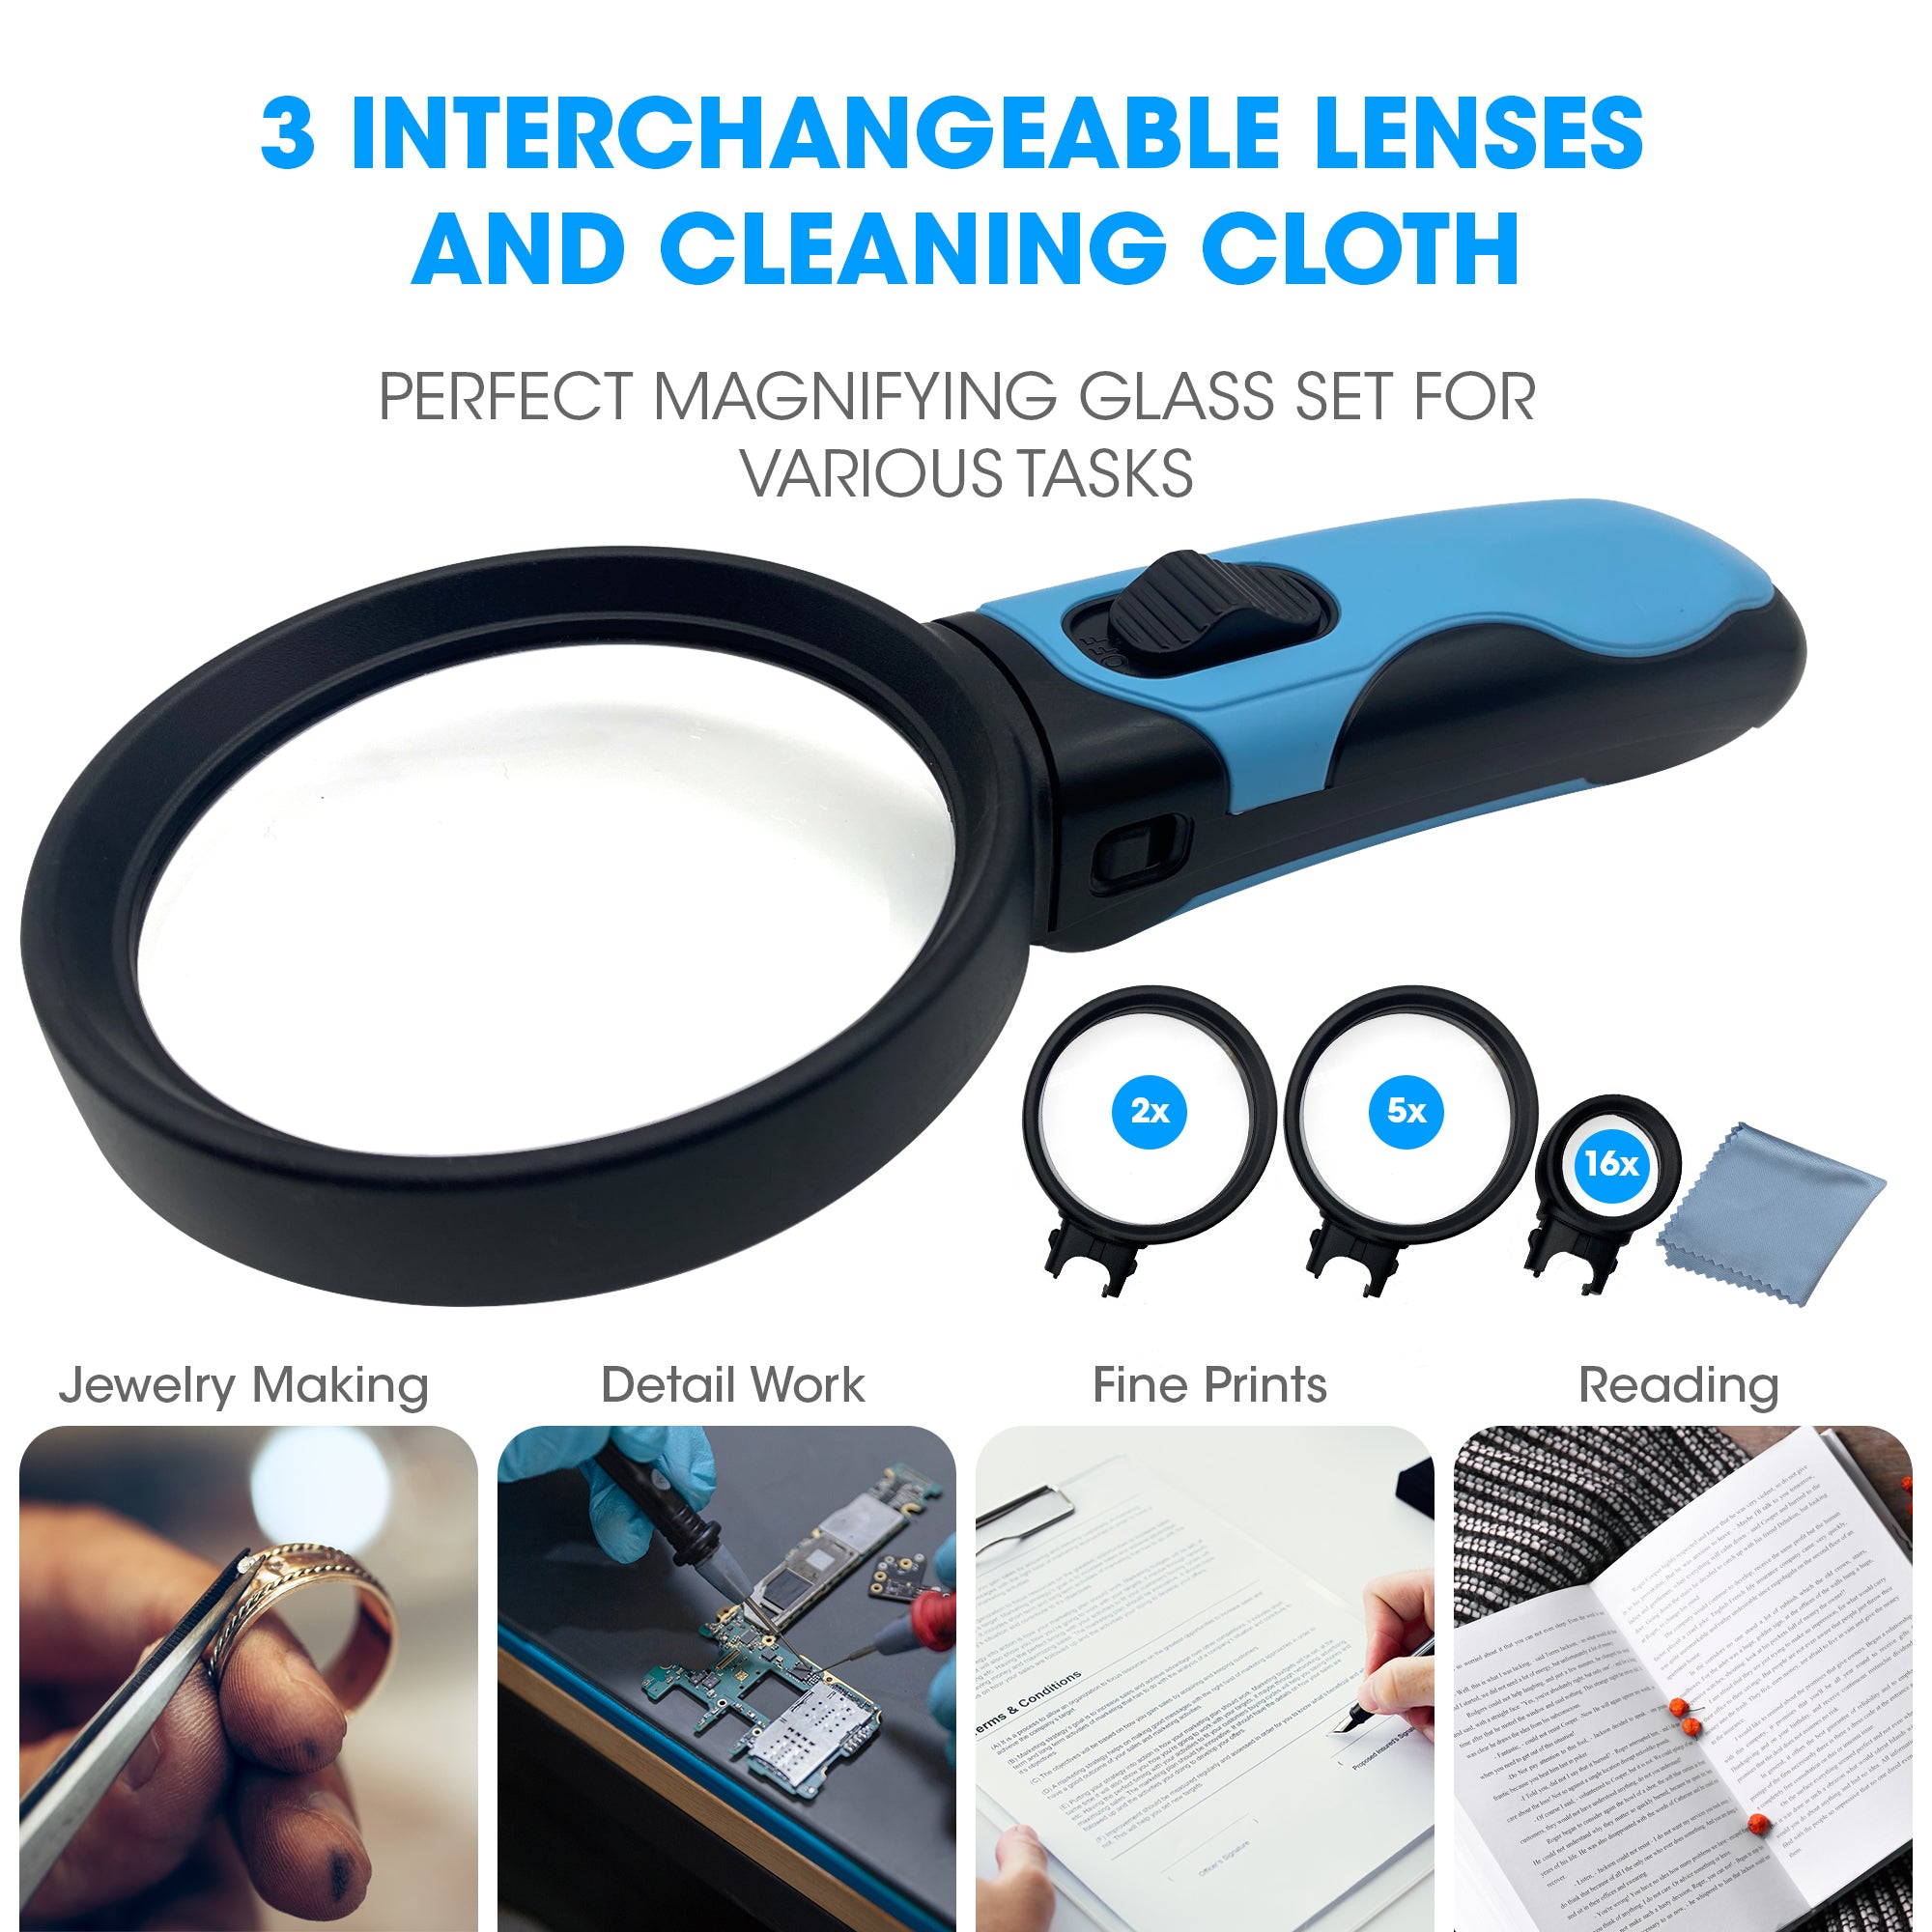 The Ultimate Guide to The Best Jewelers Loupe